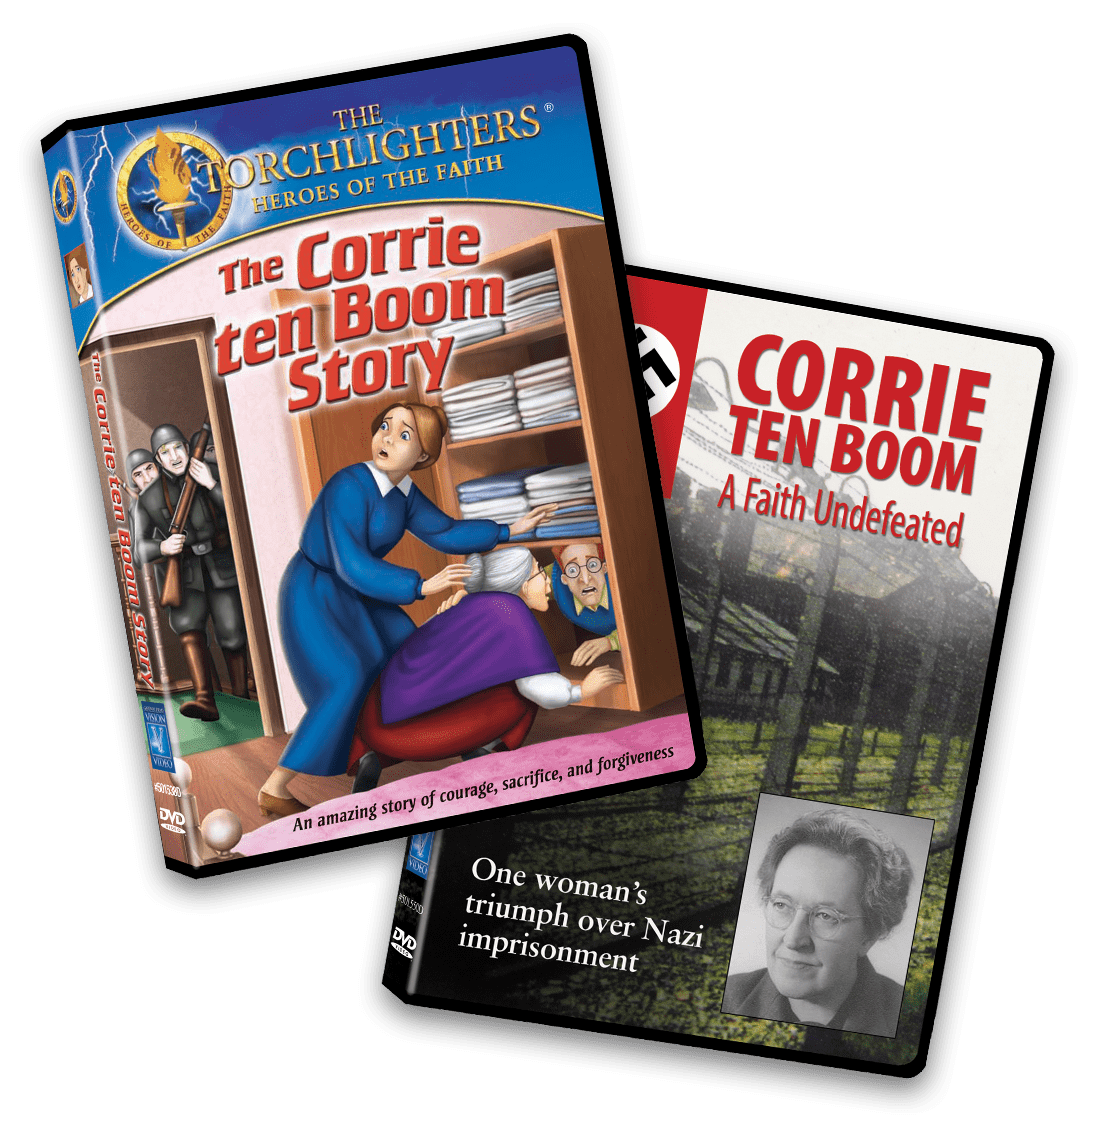 Two DVDs: The Corrie ten Boom Story and Corrie ten Boom: A Faith Undefeated